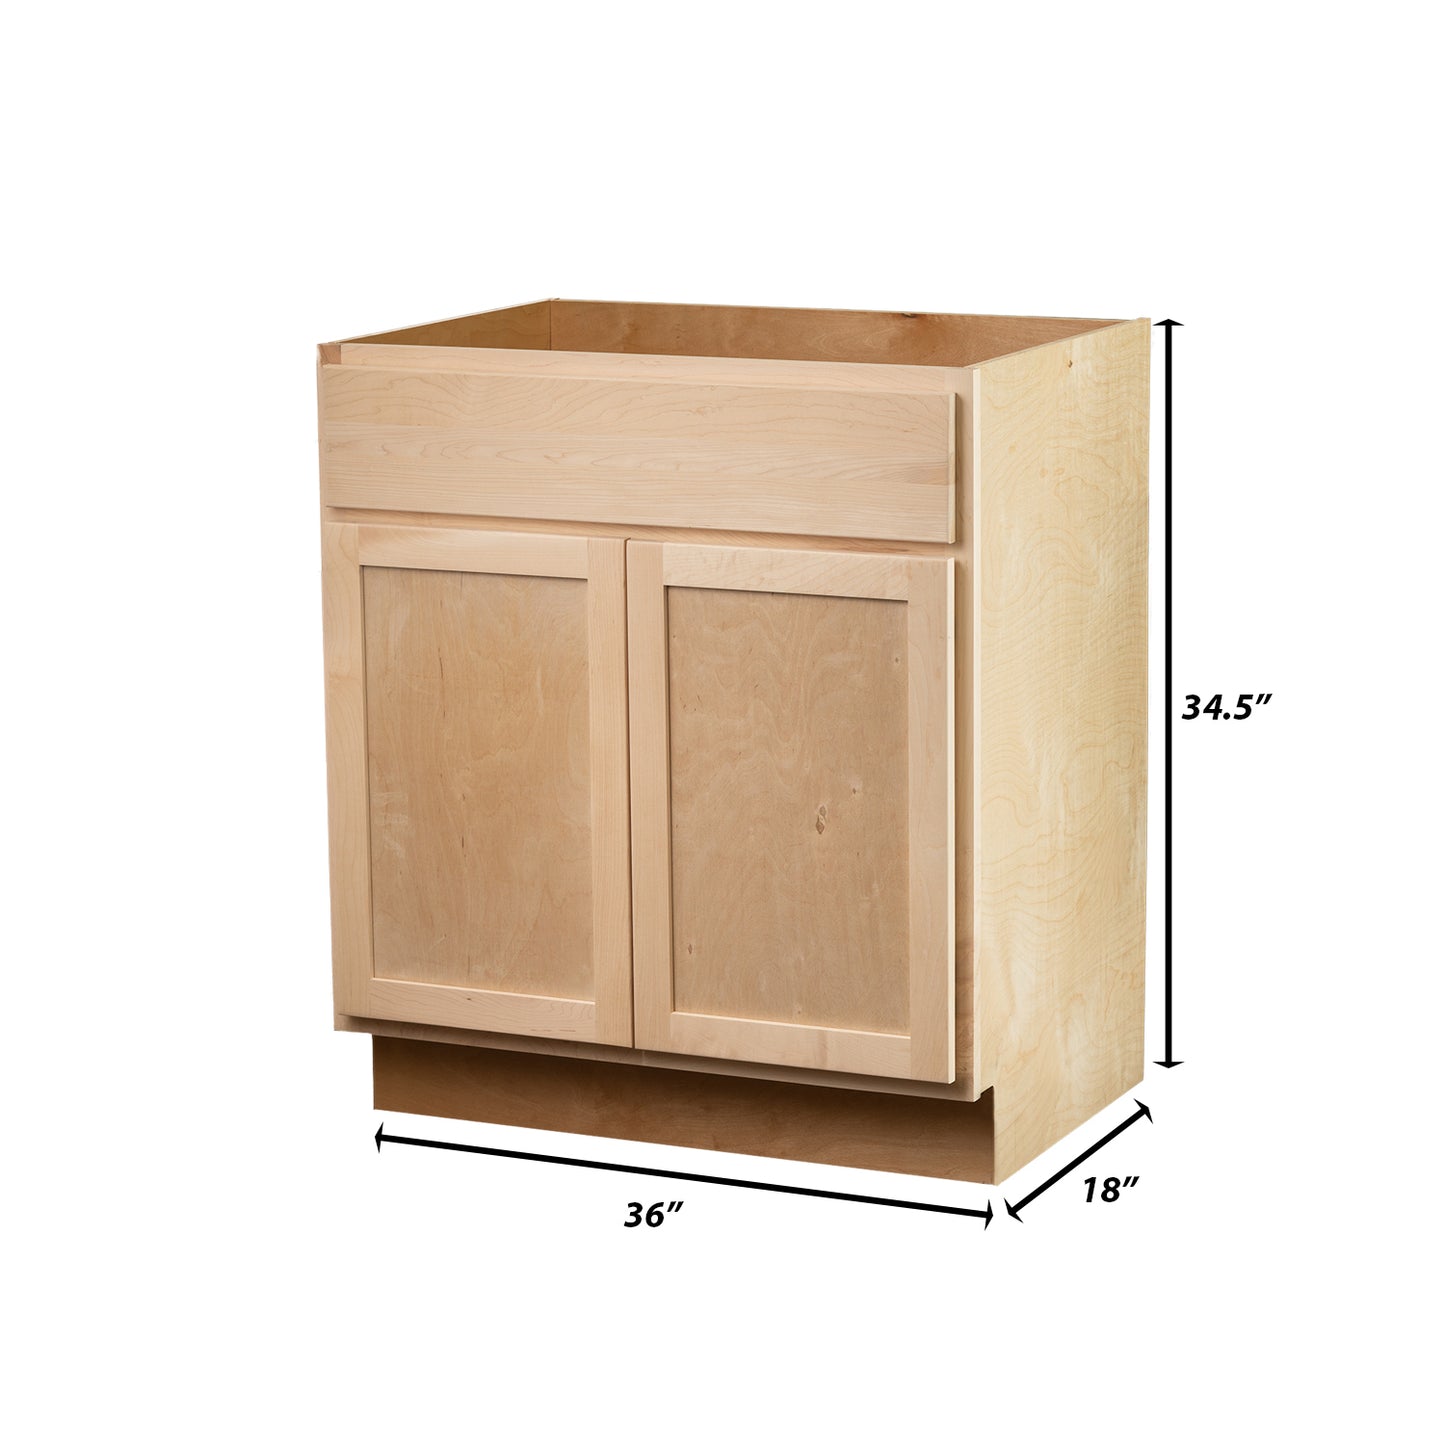 Backwoods Cabinetry RTA (Ready-to-Assemble) VSB36.34.18 - Raw Maple Vanity Base Cabinet | 36"Wx34.5"Hx18"D